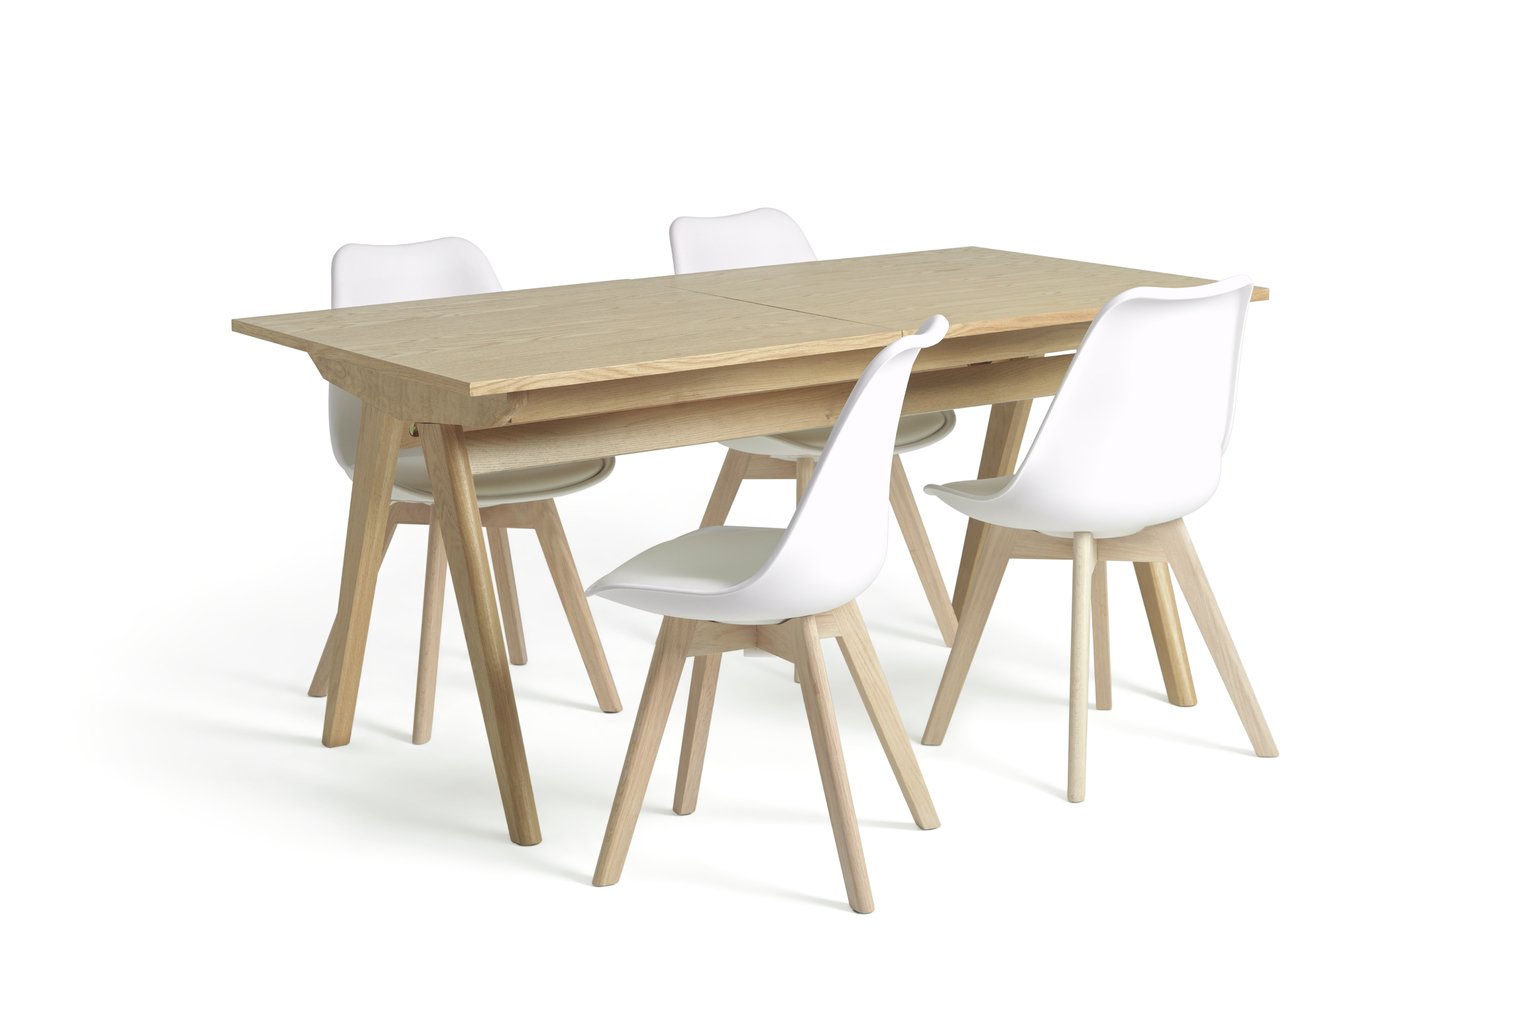 Habitat Jerry Extending Table & 4 White Chairs